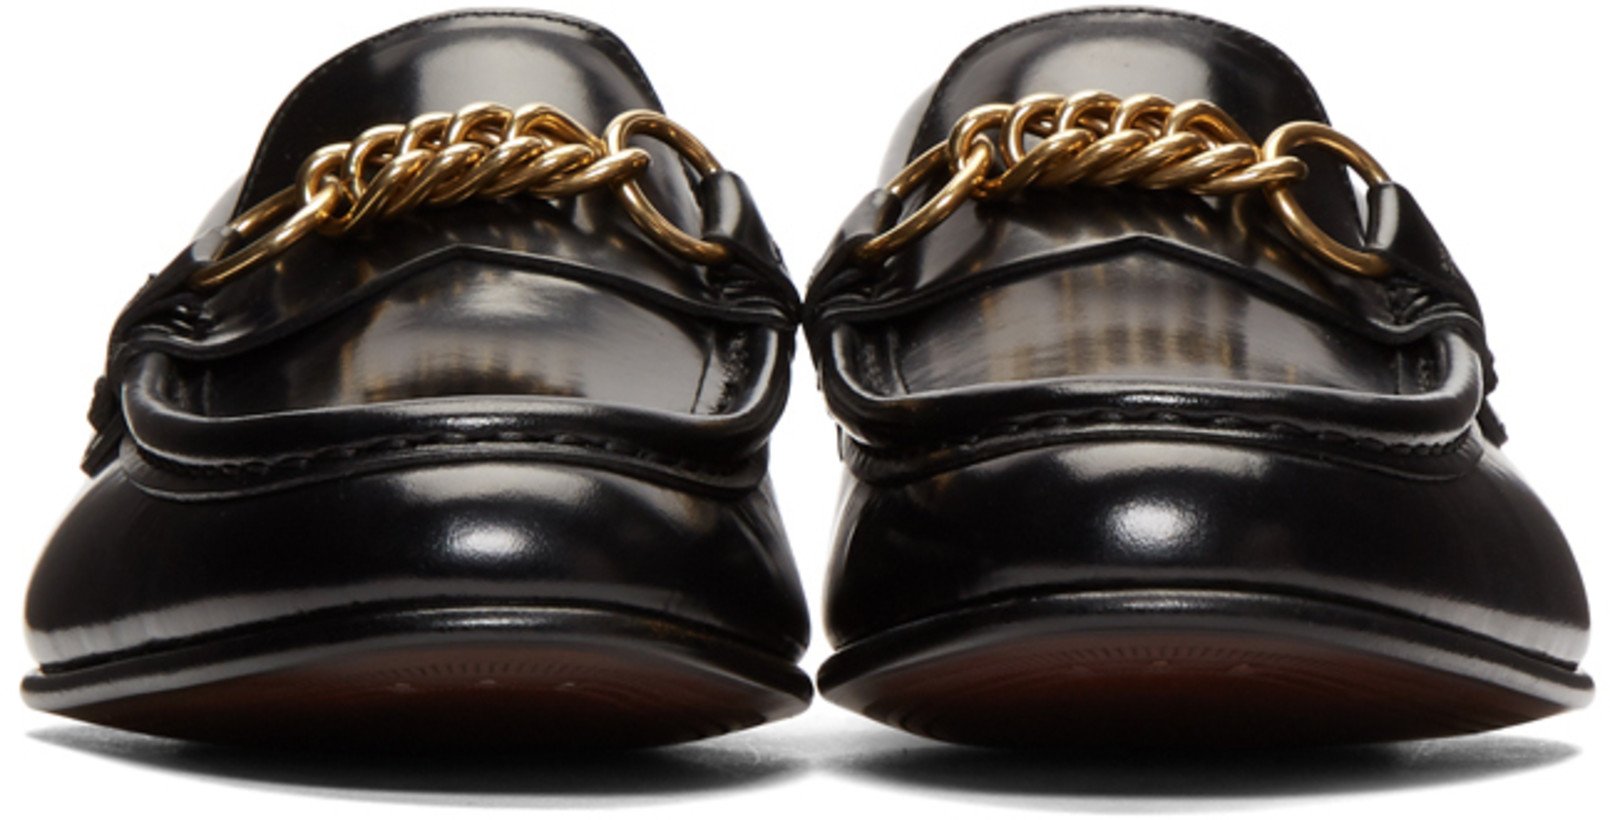 Burberry Chain Solway Loafers 'Black'